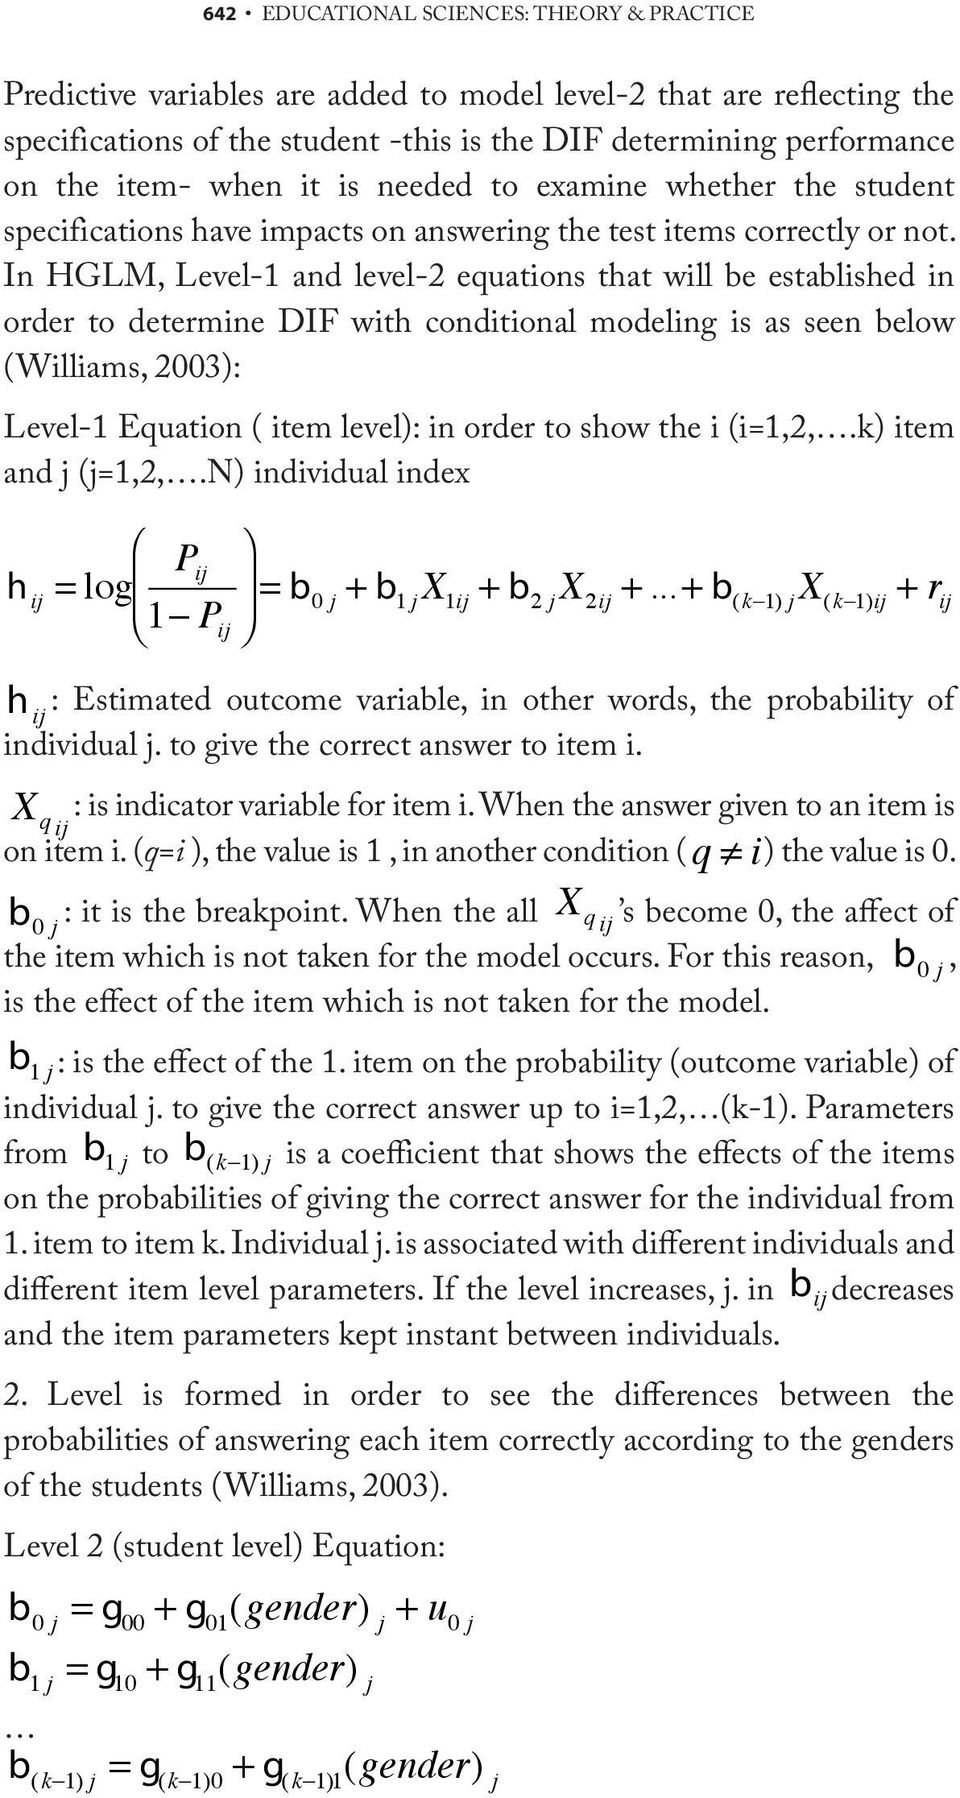 In HGLM, Level-1 and level-2 equations that will be established in order to determine DIF with conditional modeling is as seen below (Williams, 2003): Level-1 Equation ( item level): in order to show